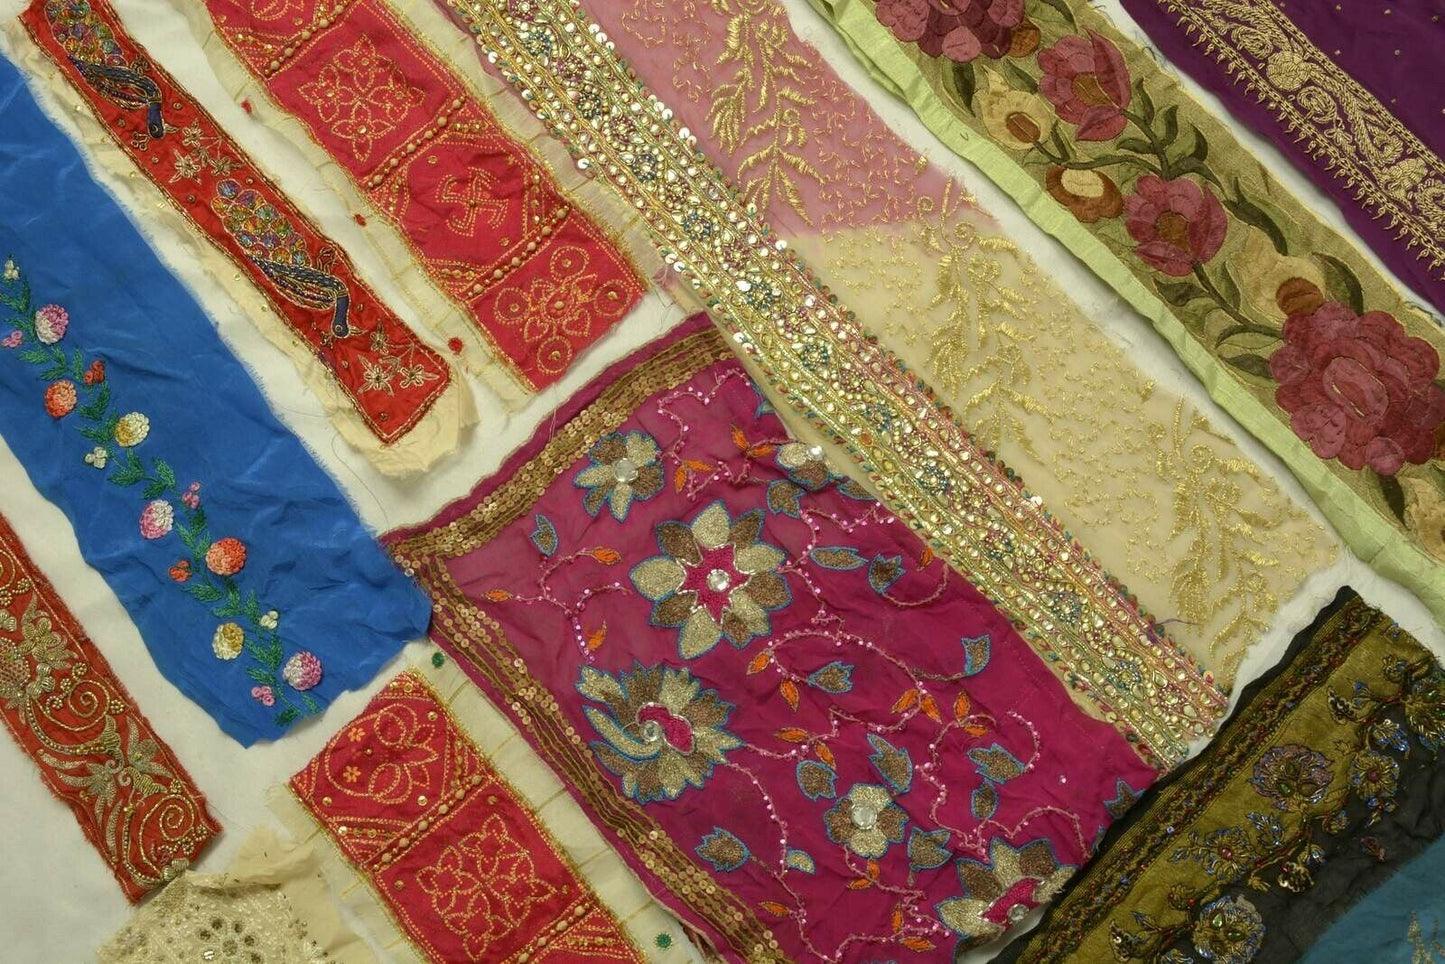 14 Pieces Assorted Lot of Vintage Sari Border Remnant Indian Craft Sewing Trim